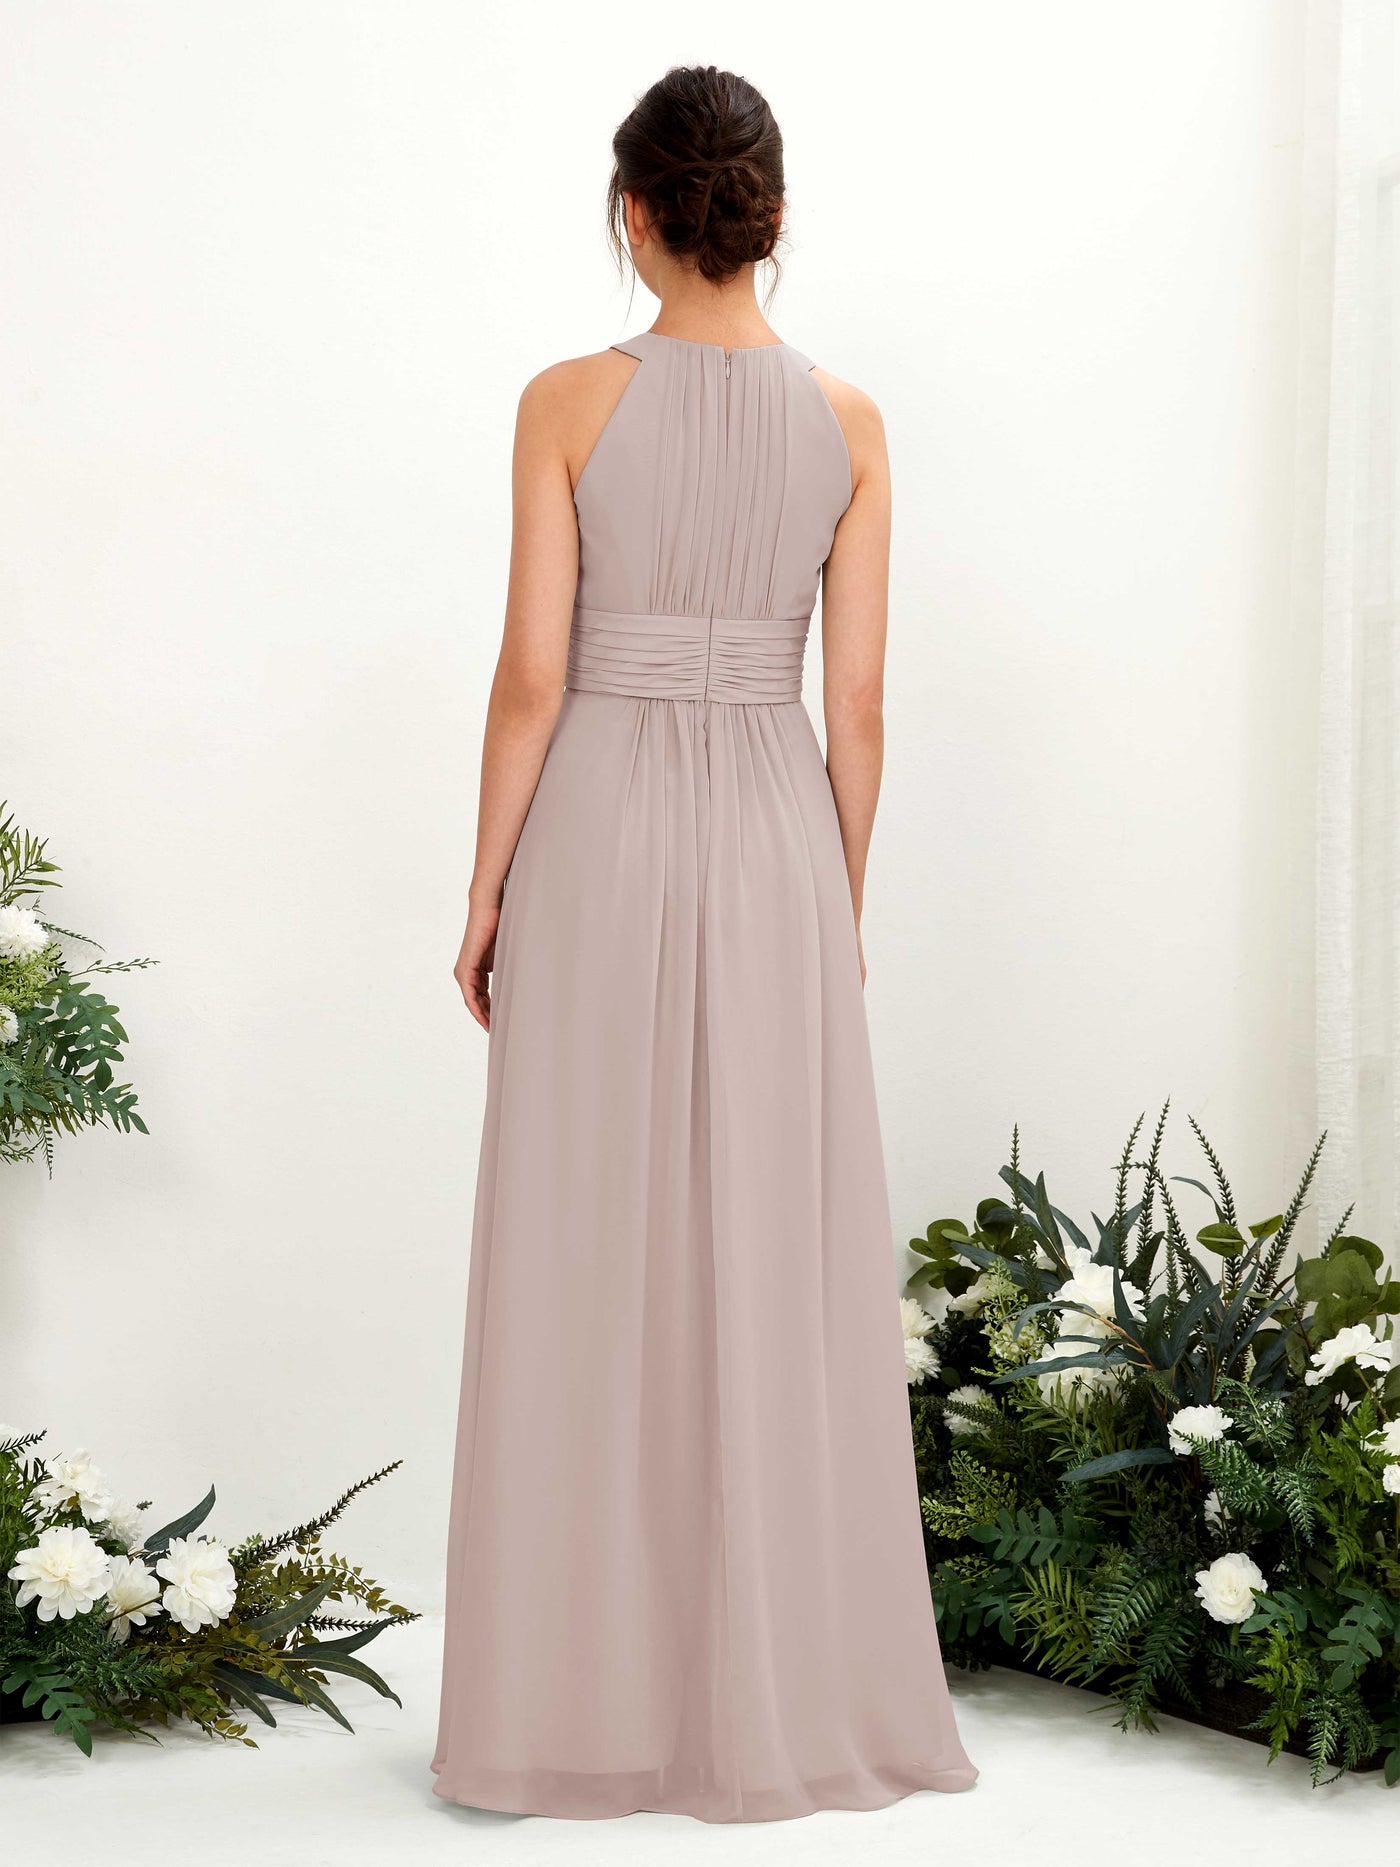 Taupe Bridesmaid Dresses Bridesmaid Dress A-line Chiffon Halter Full Length Sleeveless Wedding Party Dress (81221524)#color_taupe